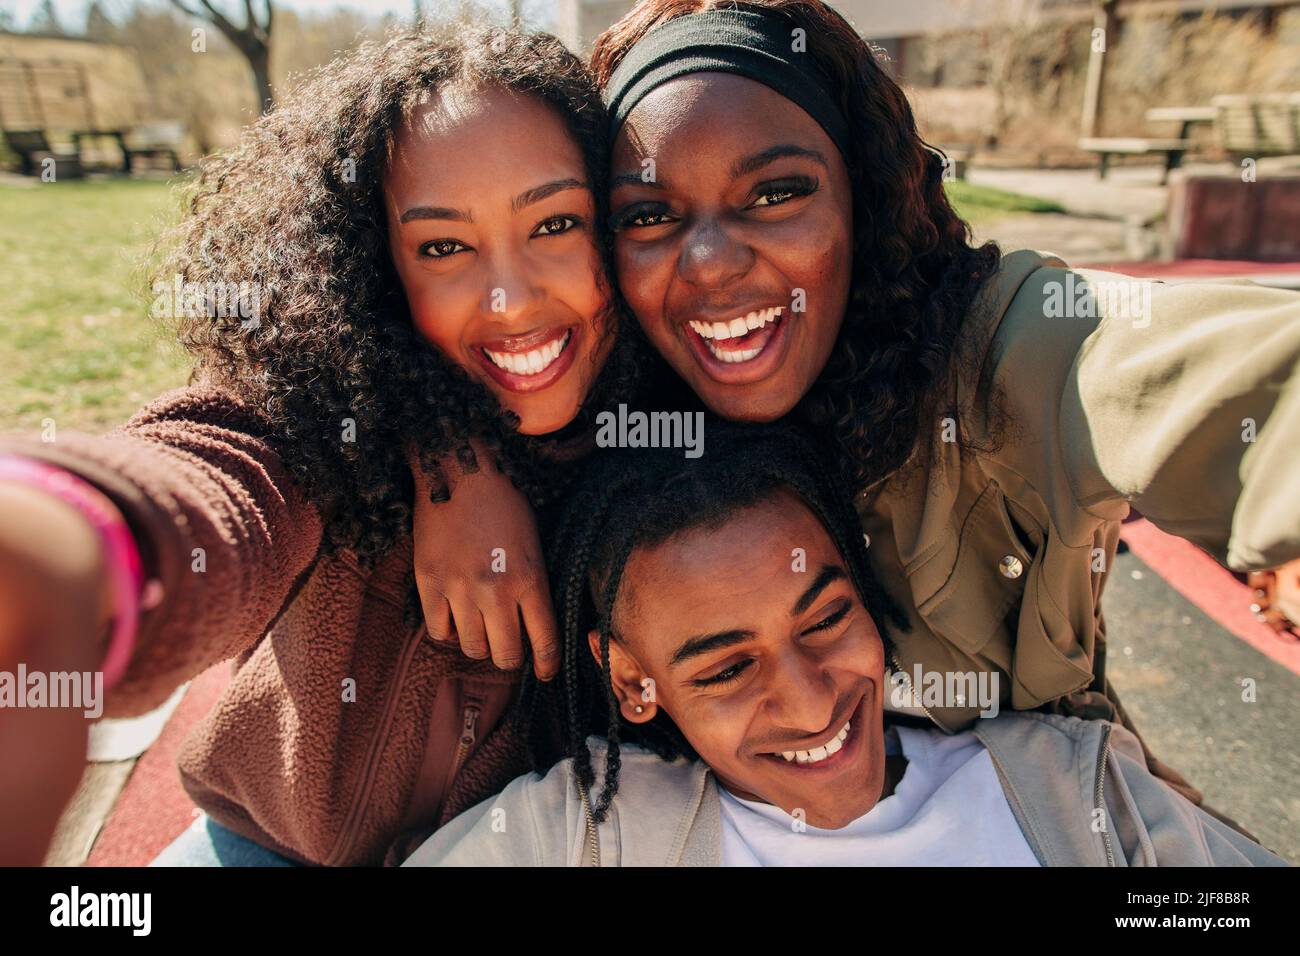 Portrait of happy young women taking selfie with male friend on sunny day Stock Photo